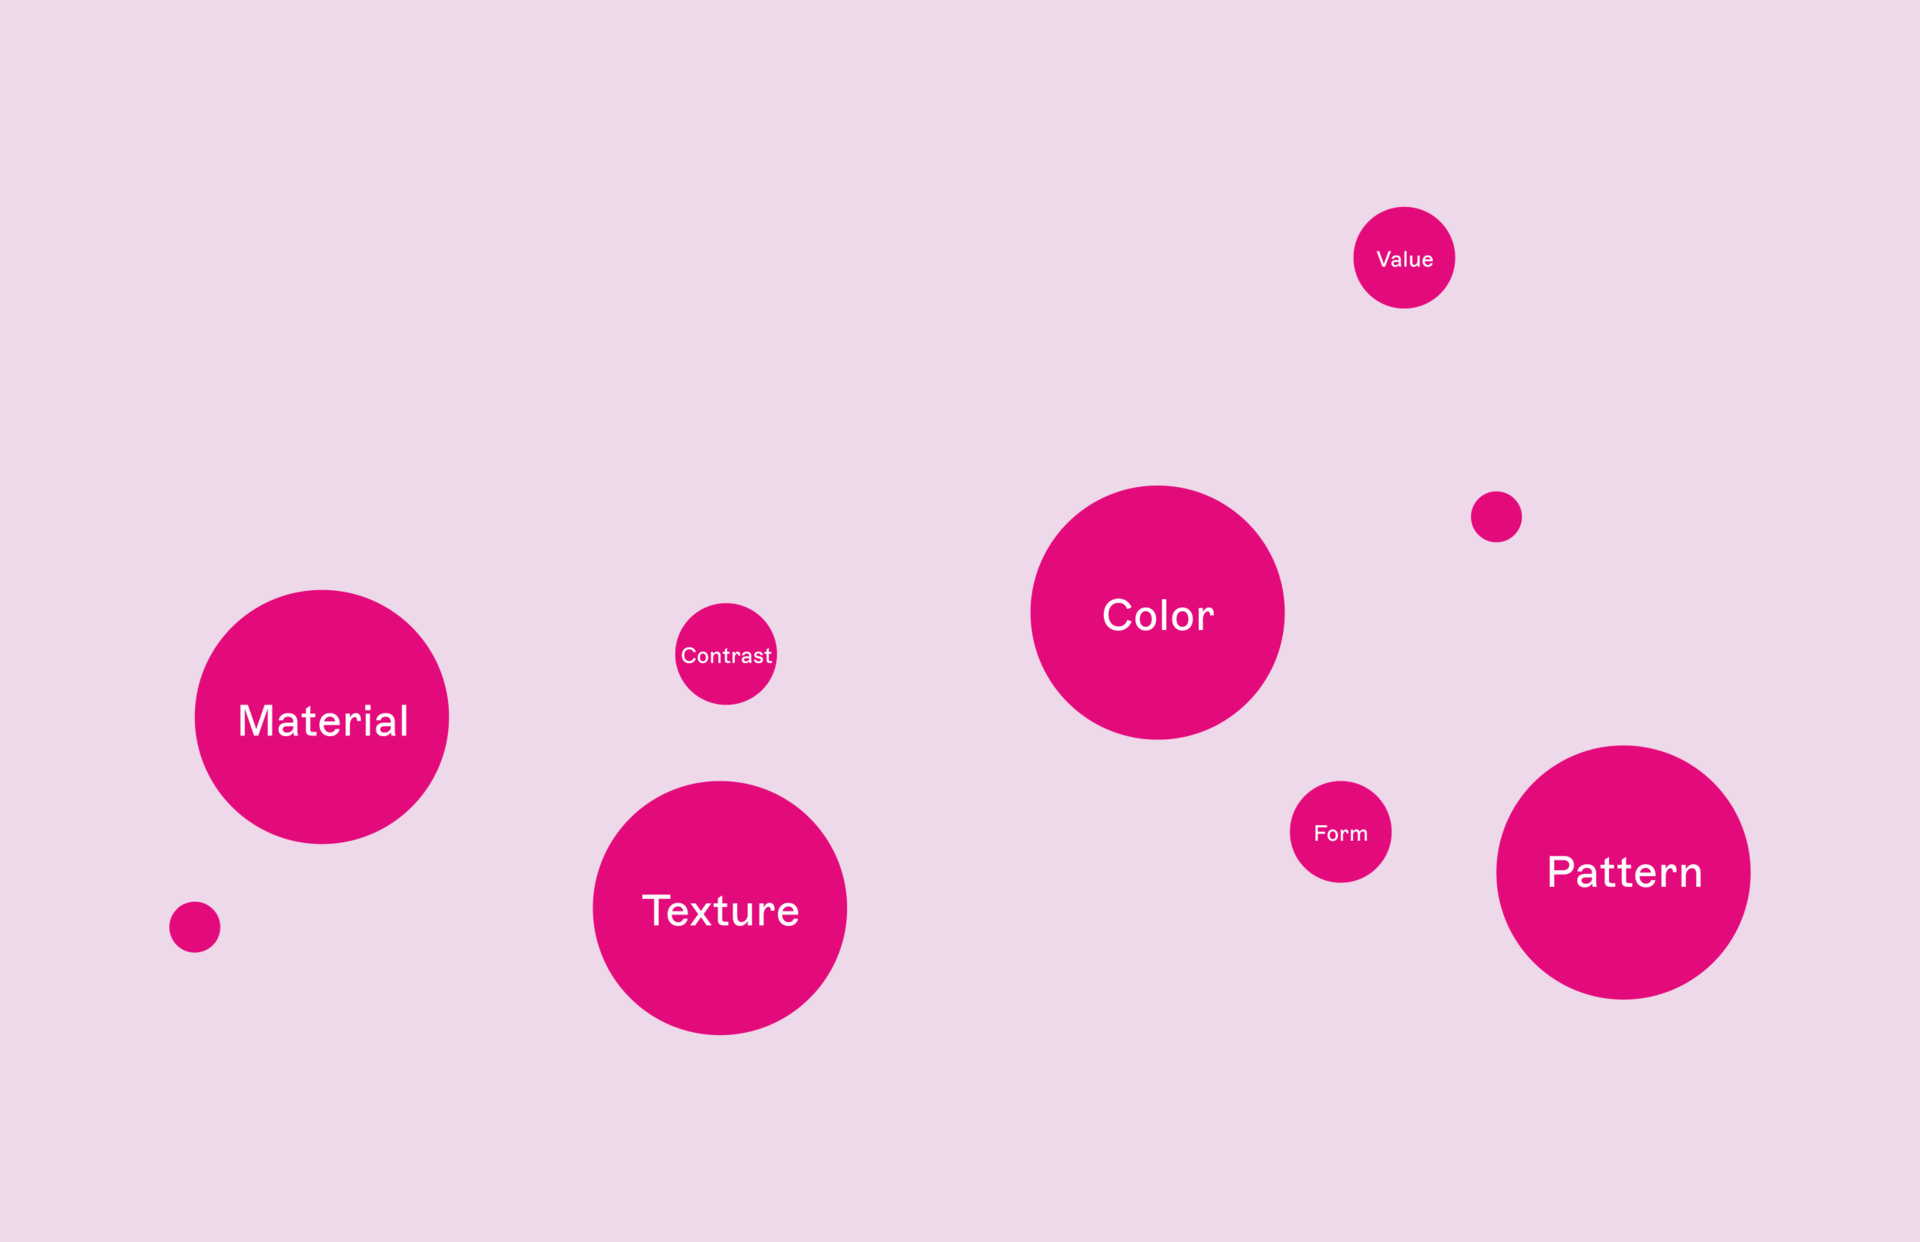 An animation showing frameworks for design semantics, syntax, and localization.